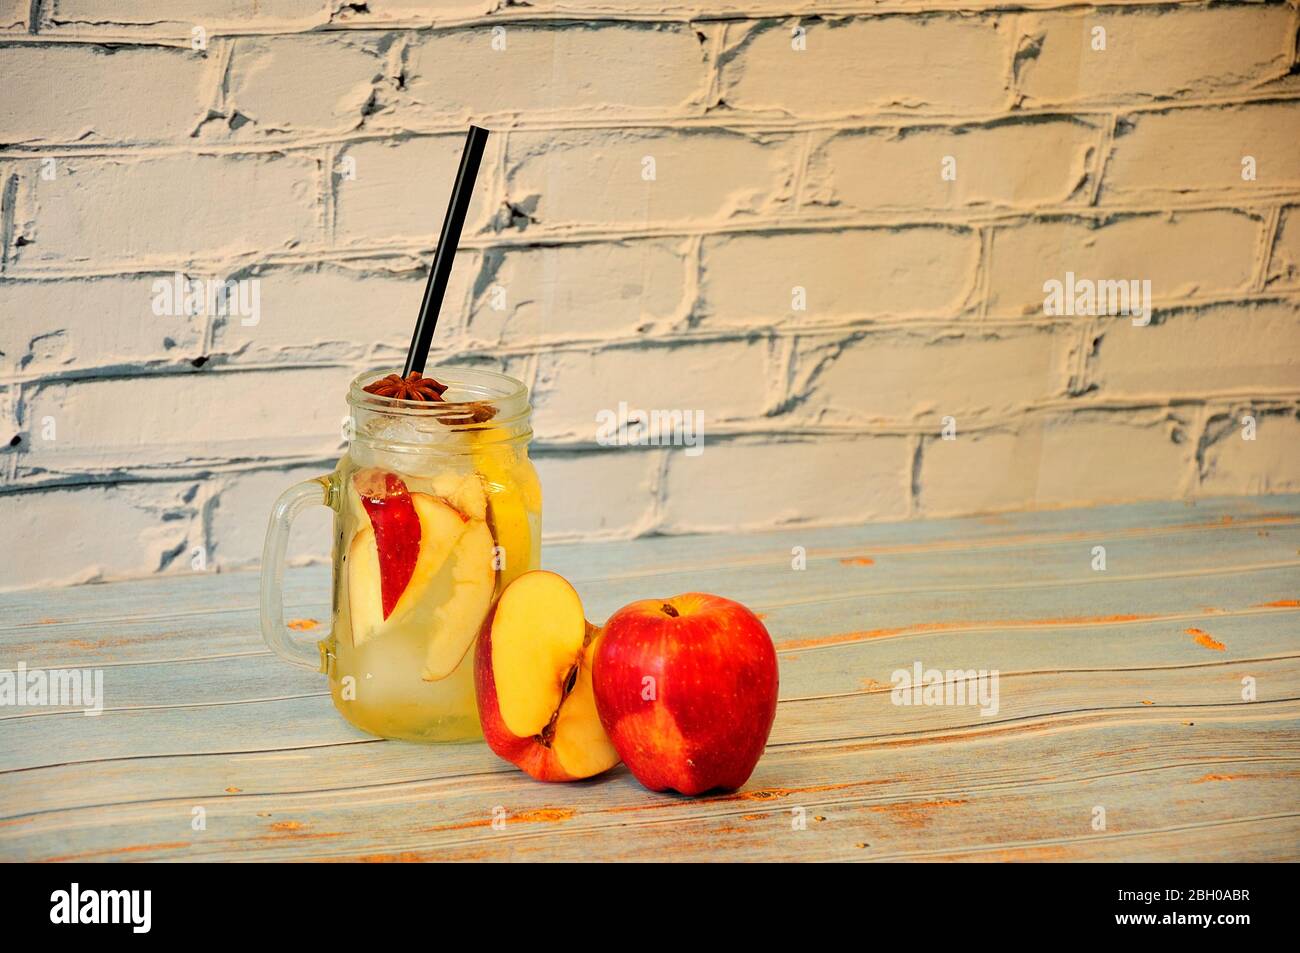 A glass mug of apple juice with ice and two red apples stand on a wooden table. Close-up. Stock Photo